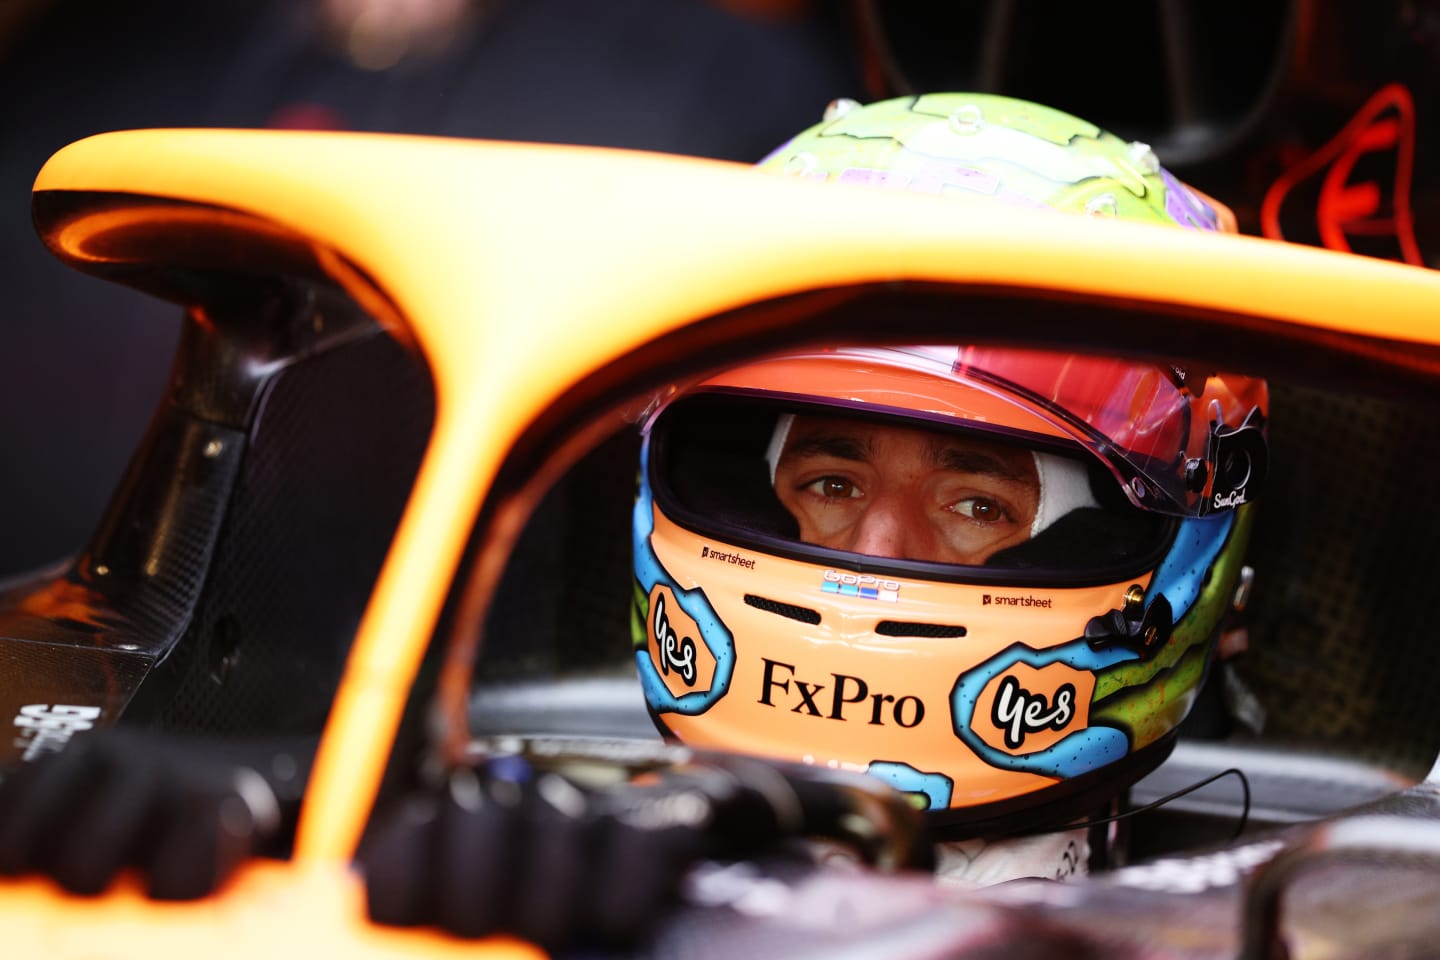 MONTREAL, QUEBEC - JUNE 18: Daniel Ricciardo of Australia and McLaren prepares to drive in the garage during final practice ahead of the F1 Grand Prix of Canada at Circuit Gilles Villeneuve on June 18, 2022 in Montreal, Quebec. (Photo by Clive Rose/Getty Images)